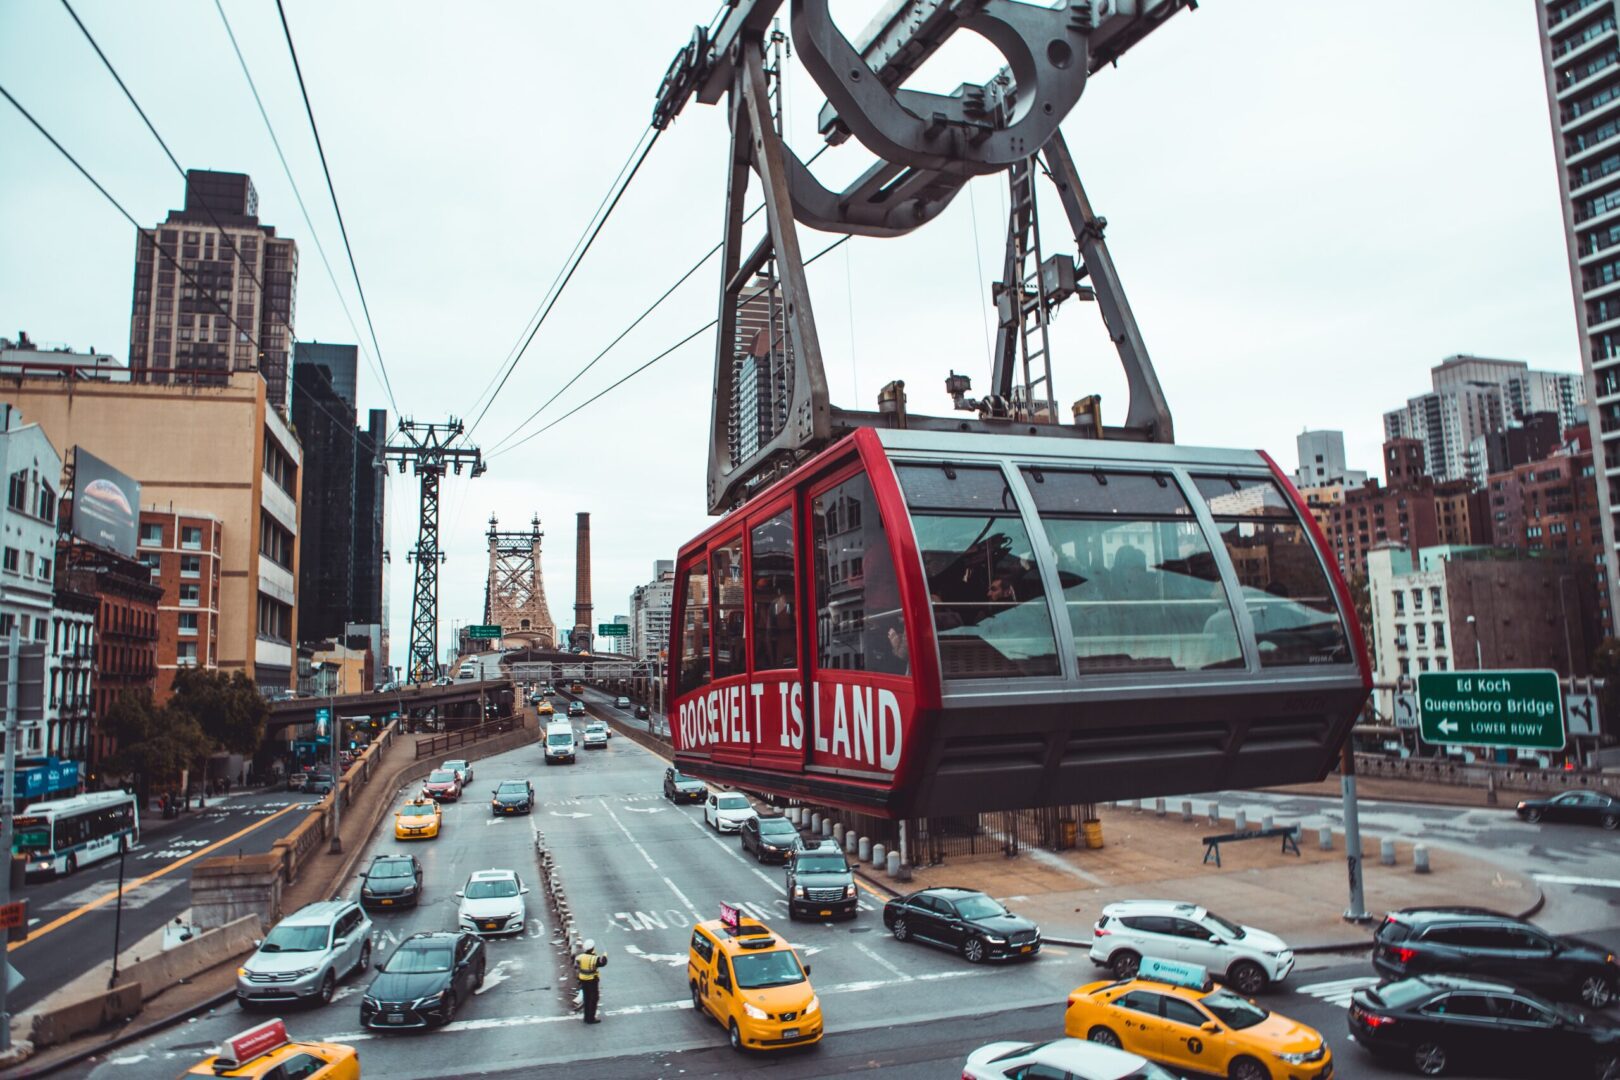 Roosevelt island tramway cabin gliding above busy city traffic.